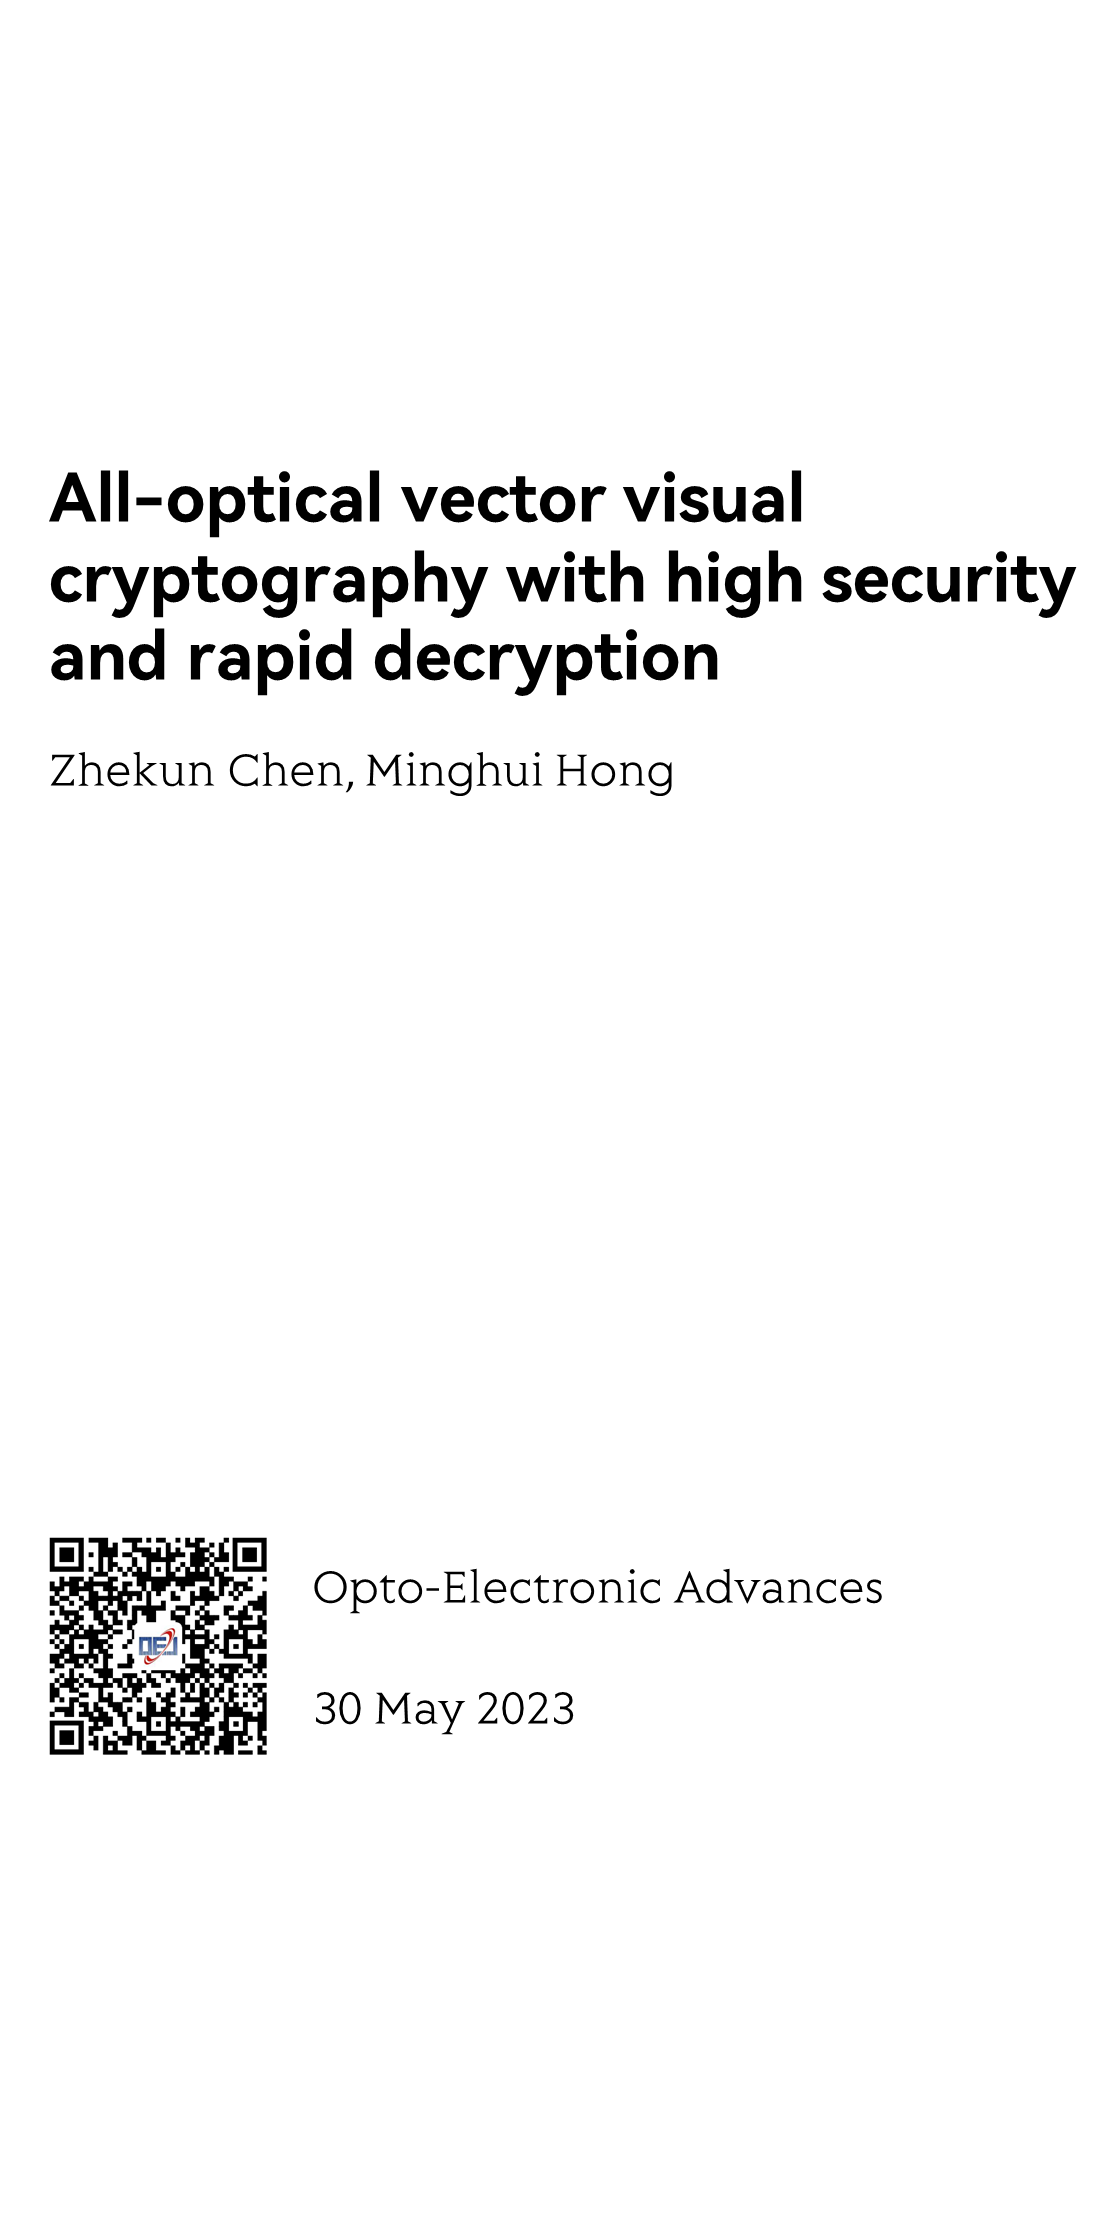 All-optical vector visual cryptography with high security and rapid decryption_1